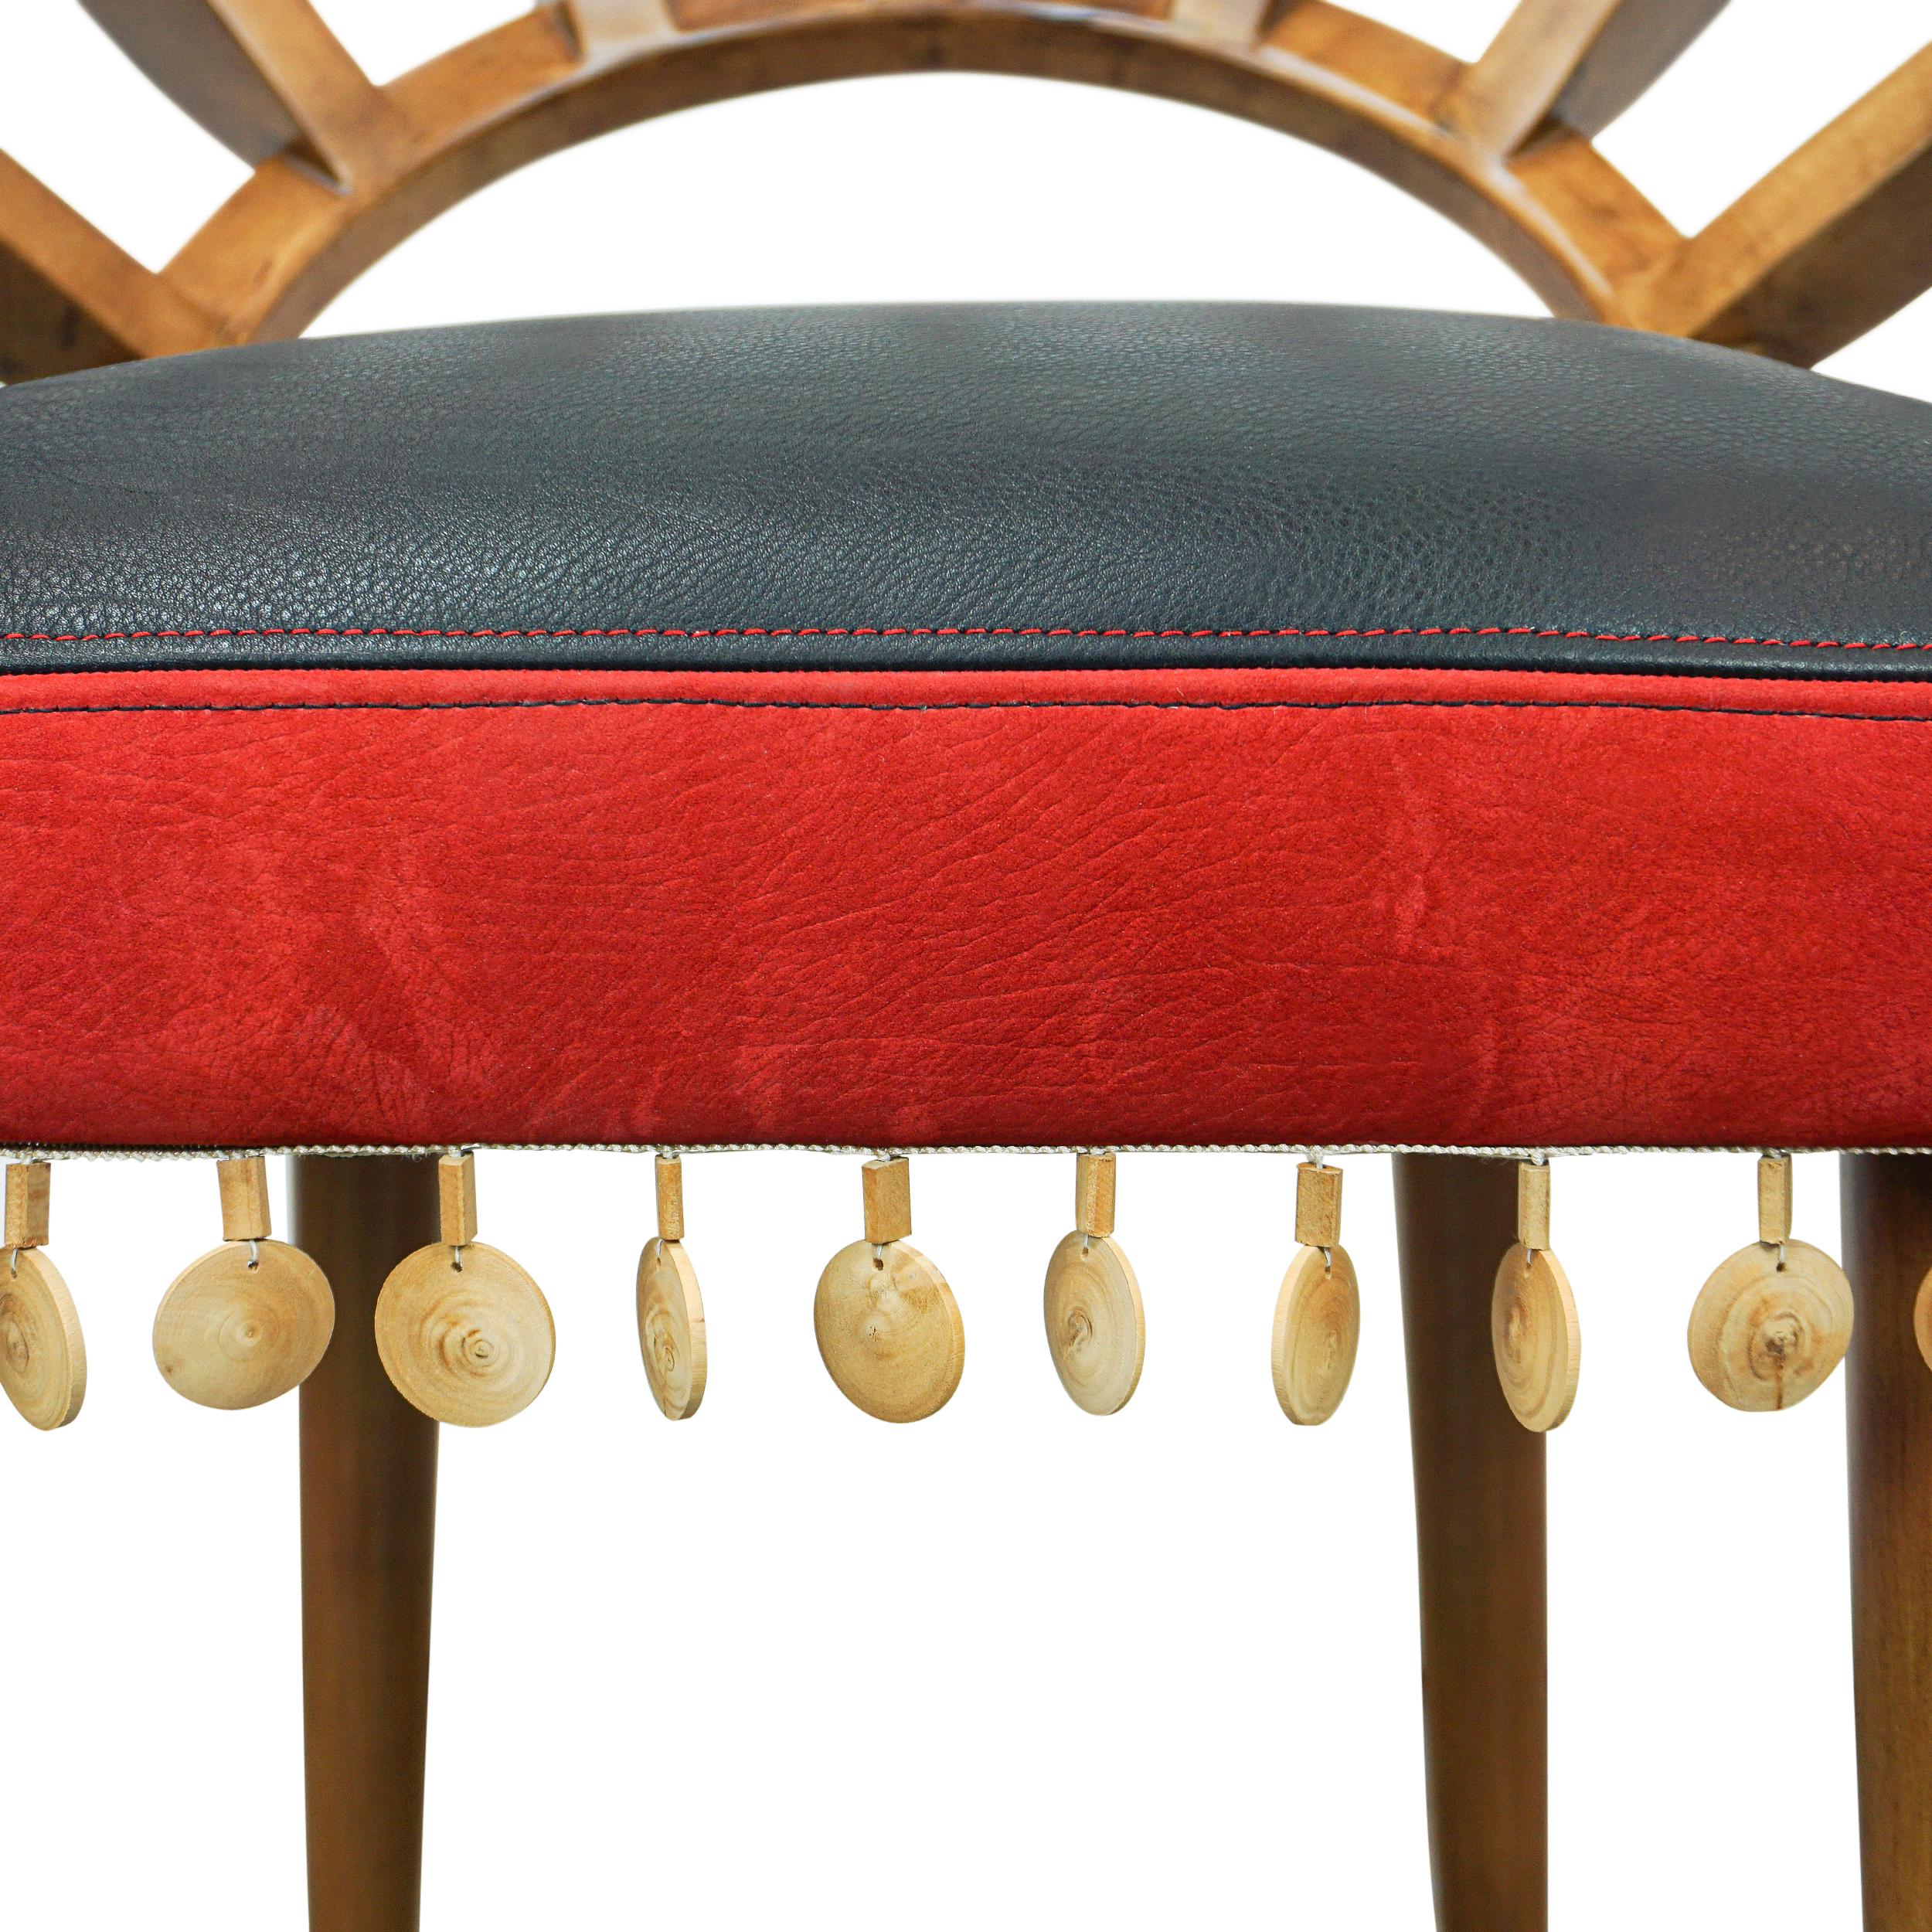 Ribbed Wood Chair with Cheetah Hair on Hide, Red + Black Leather and Wood Bead For Sale 5